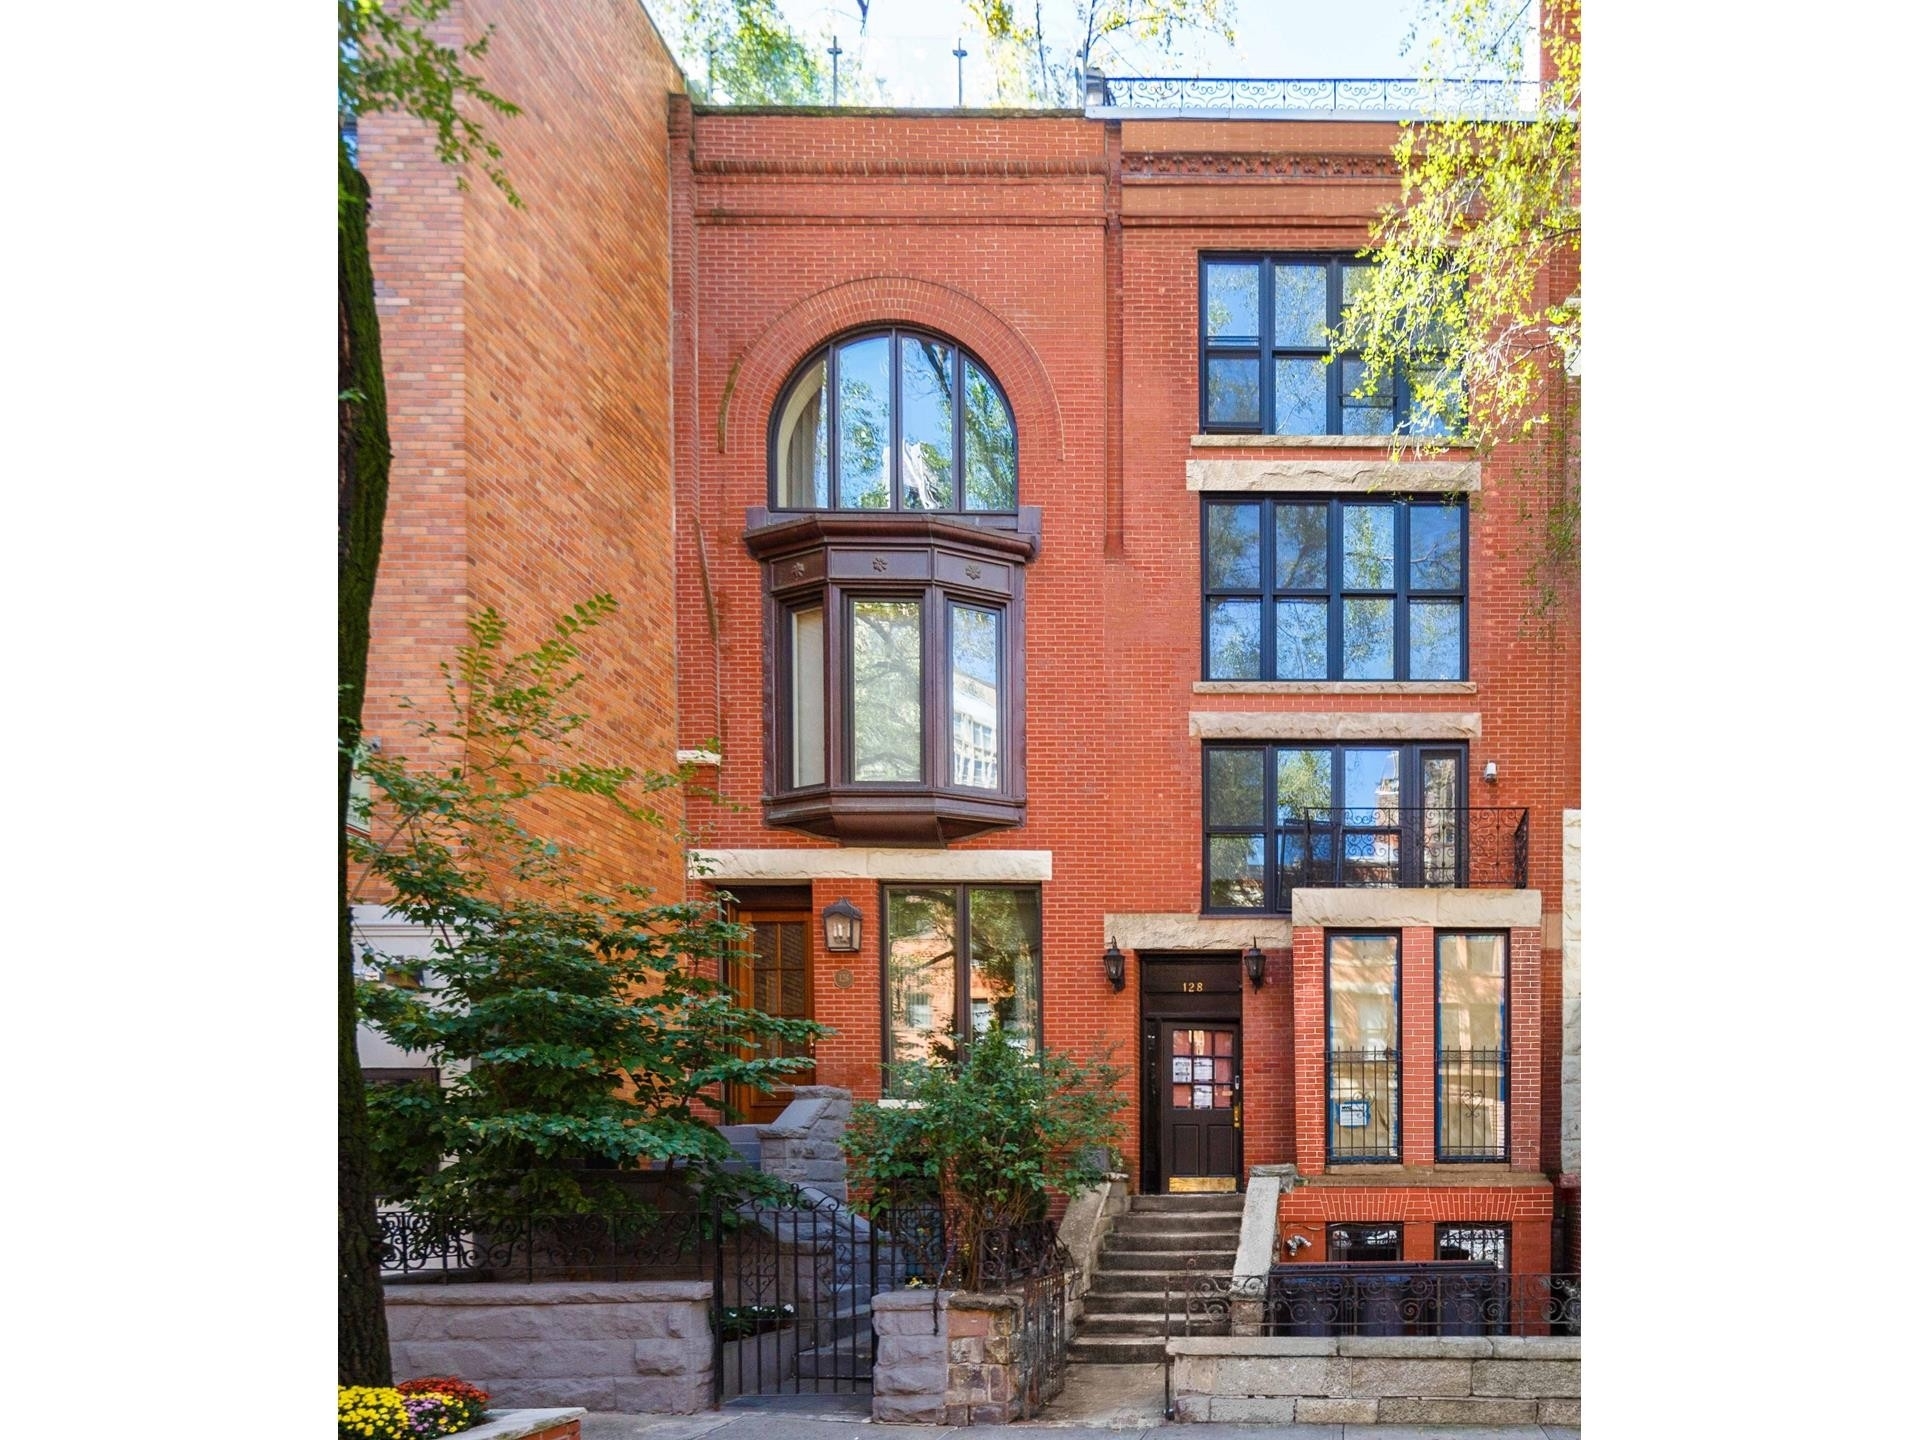 Single Family Townhouse for Sale at 128 W 95TH ST, TOWNHOUSE Upper West Side, New York, NY 10025